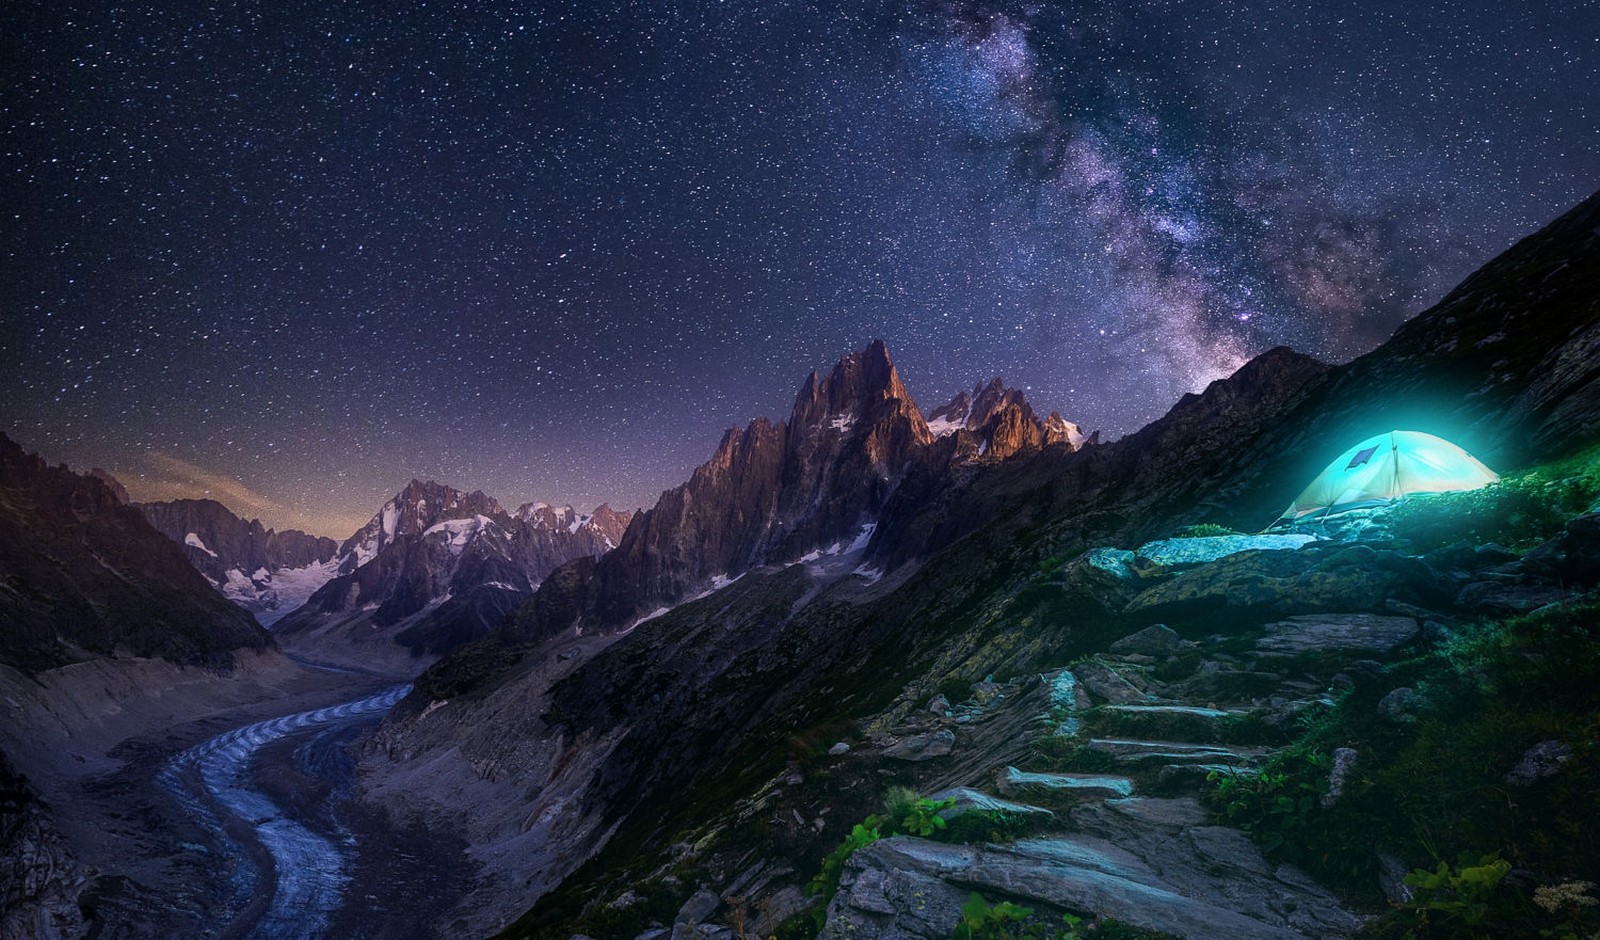 landscape, Photography, Nature, Milky Way, Mountains, Glaciers, Starry night, Camping, Snow, Lights, Peace, Long exposure Wallpaper